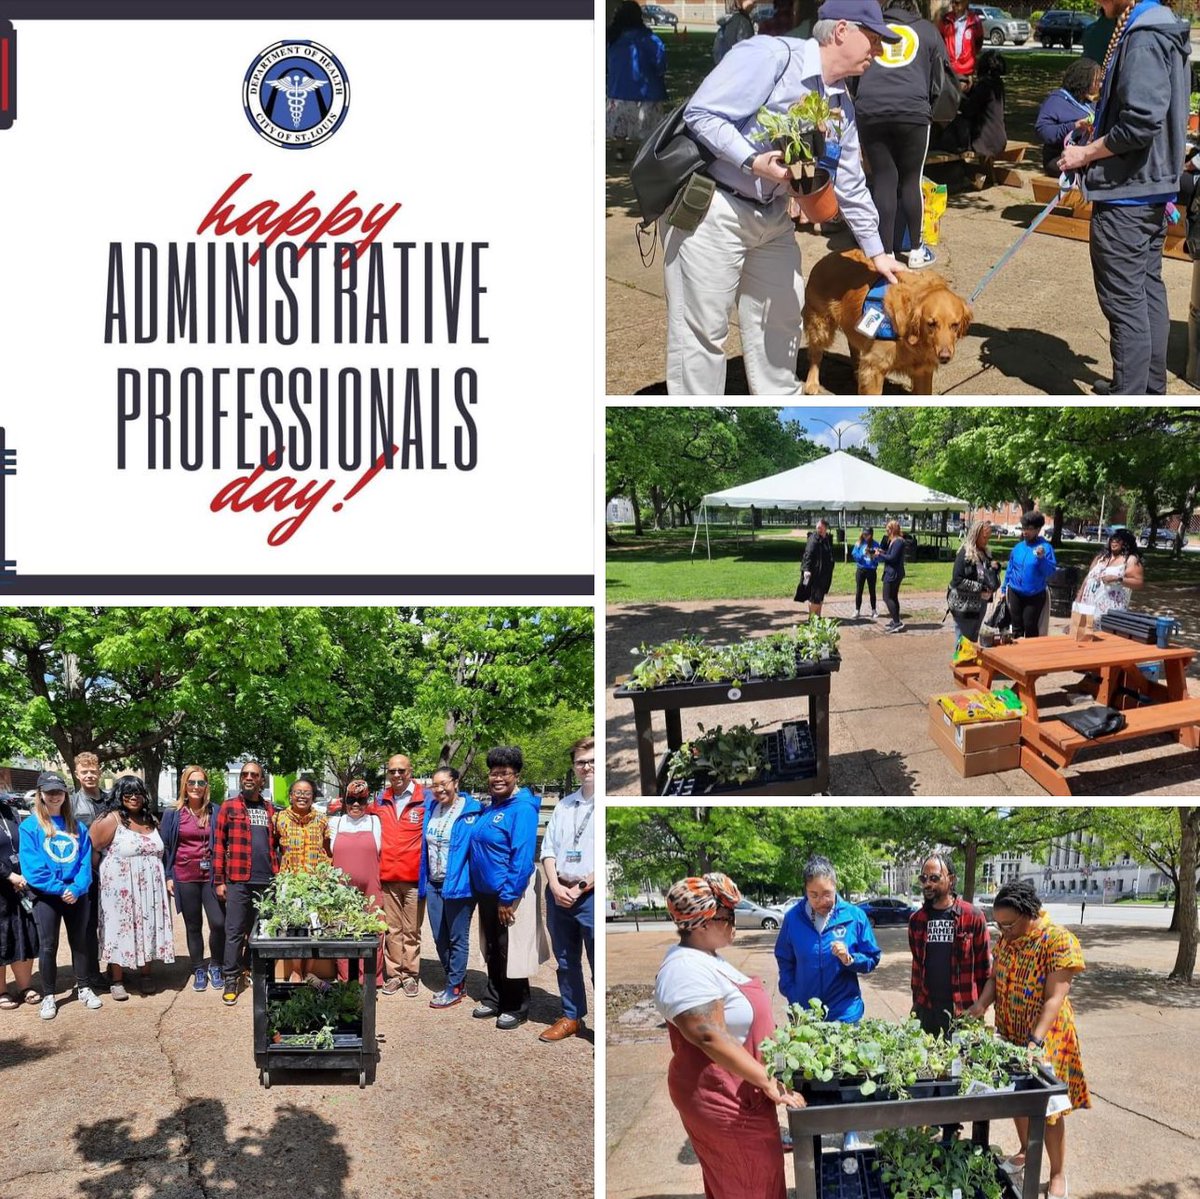 A healthy work environment has been my number one priority. I’m so proud to have grown the Department by over 35% in my first 2 years. Our quarterly wellness days are a big part of those retention (not just recruitment) efforts. This one was so much fun! Pup therapy and planting!